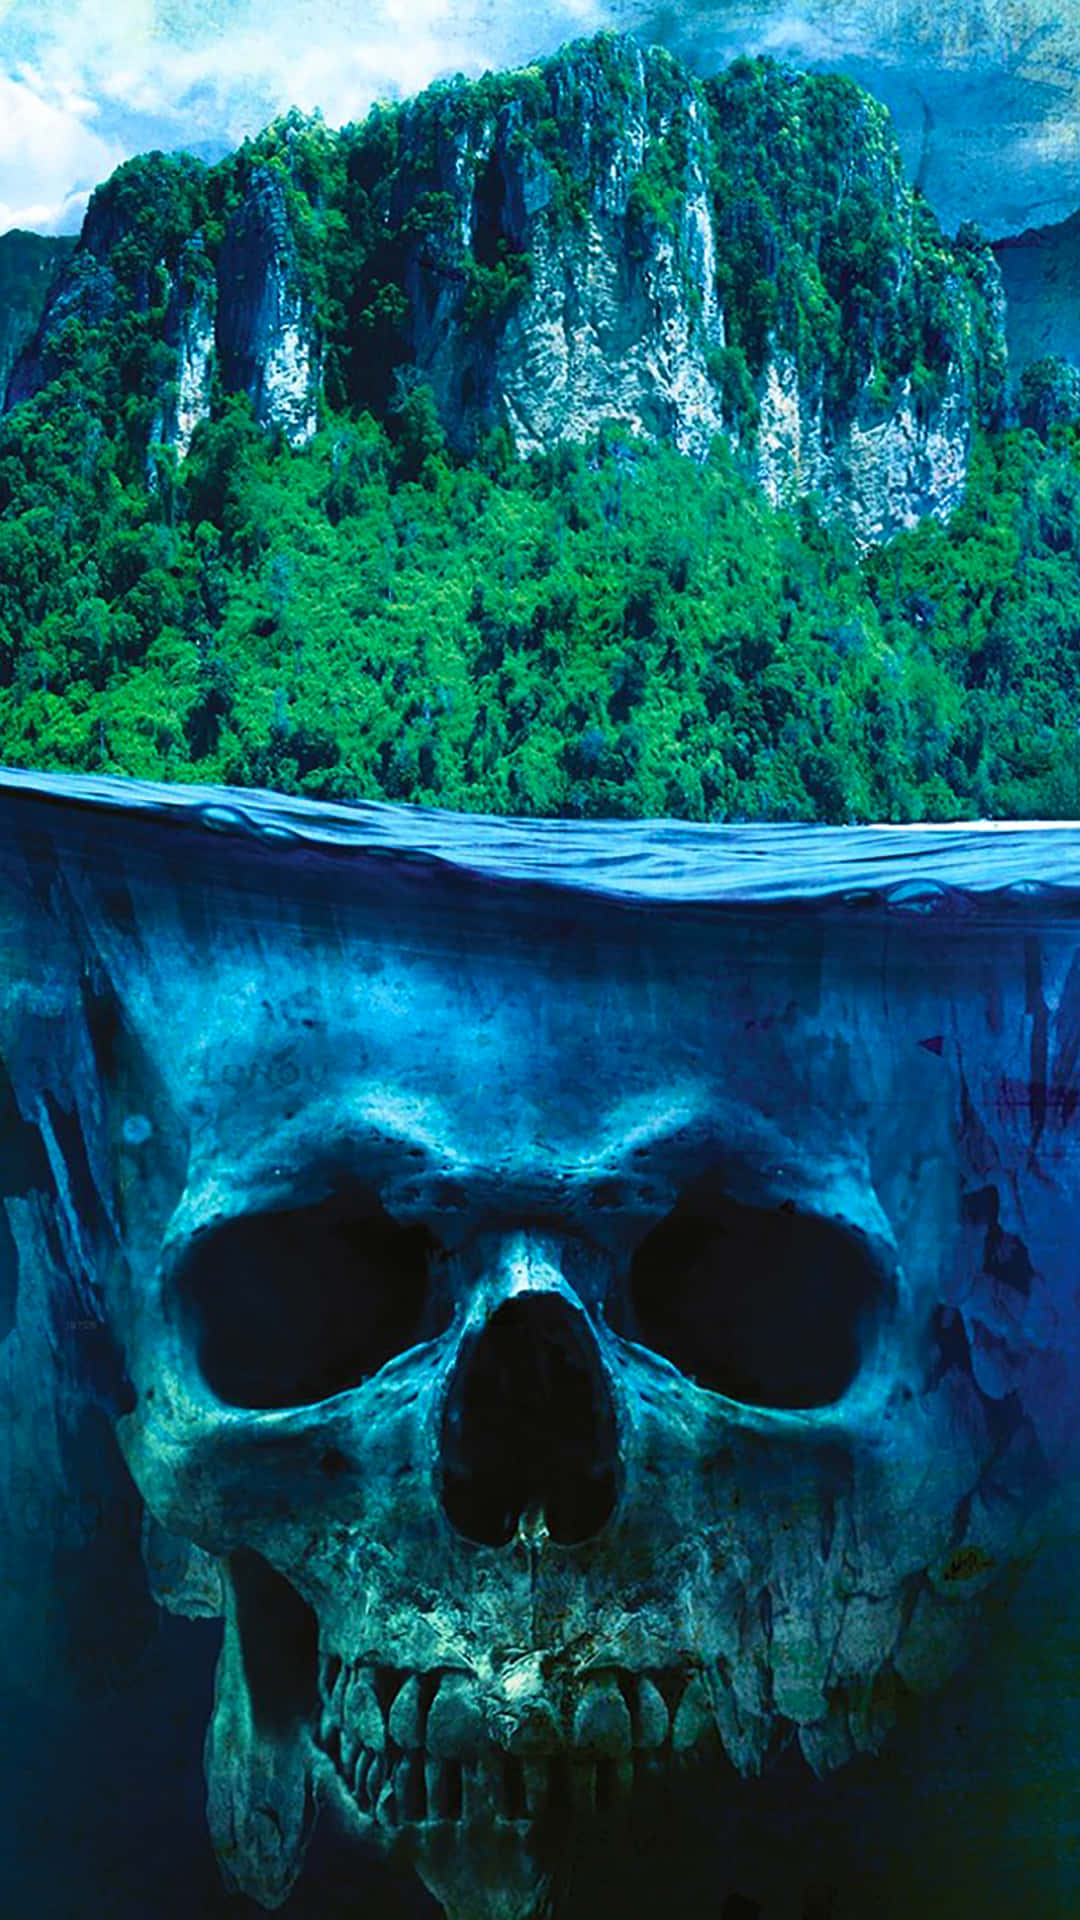 Iphone Xs Max Far Cry 3 Background Rook Island